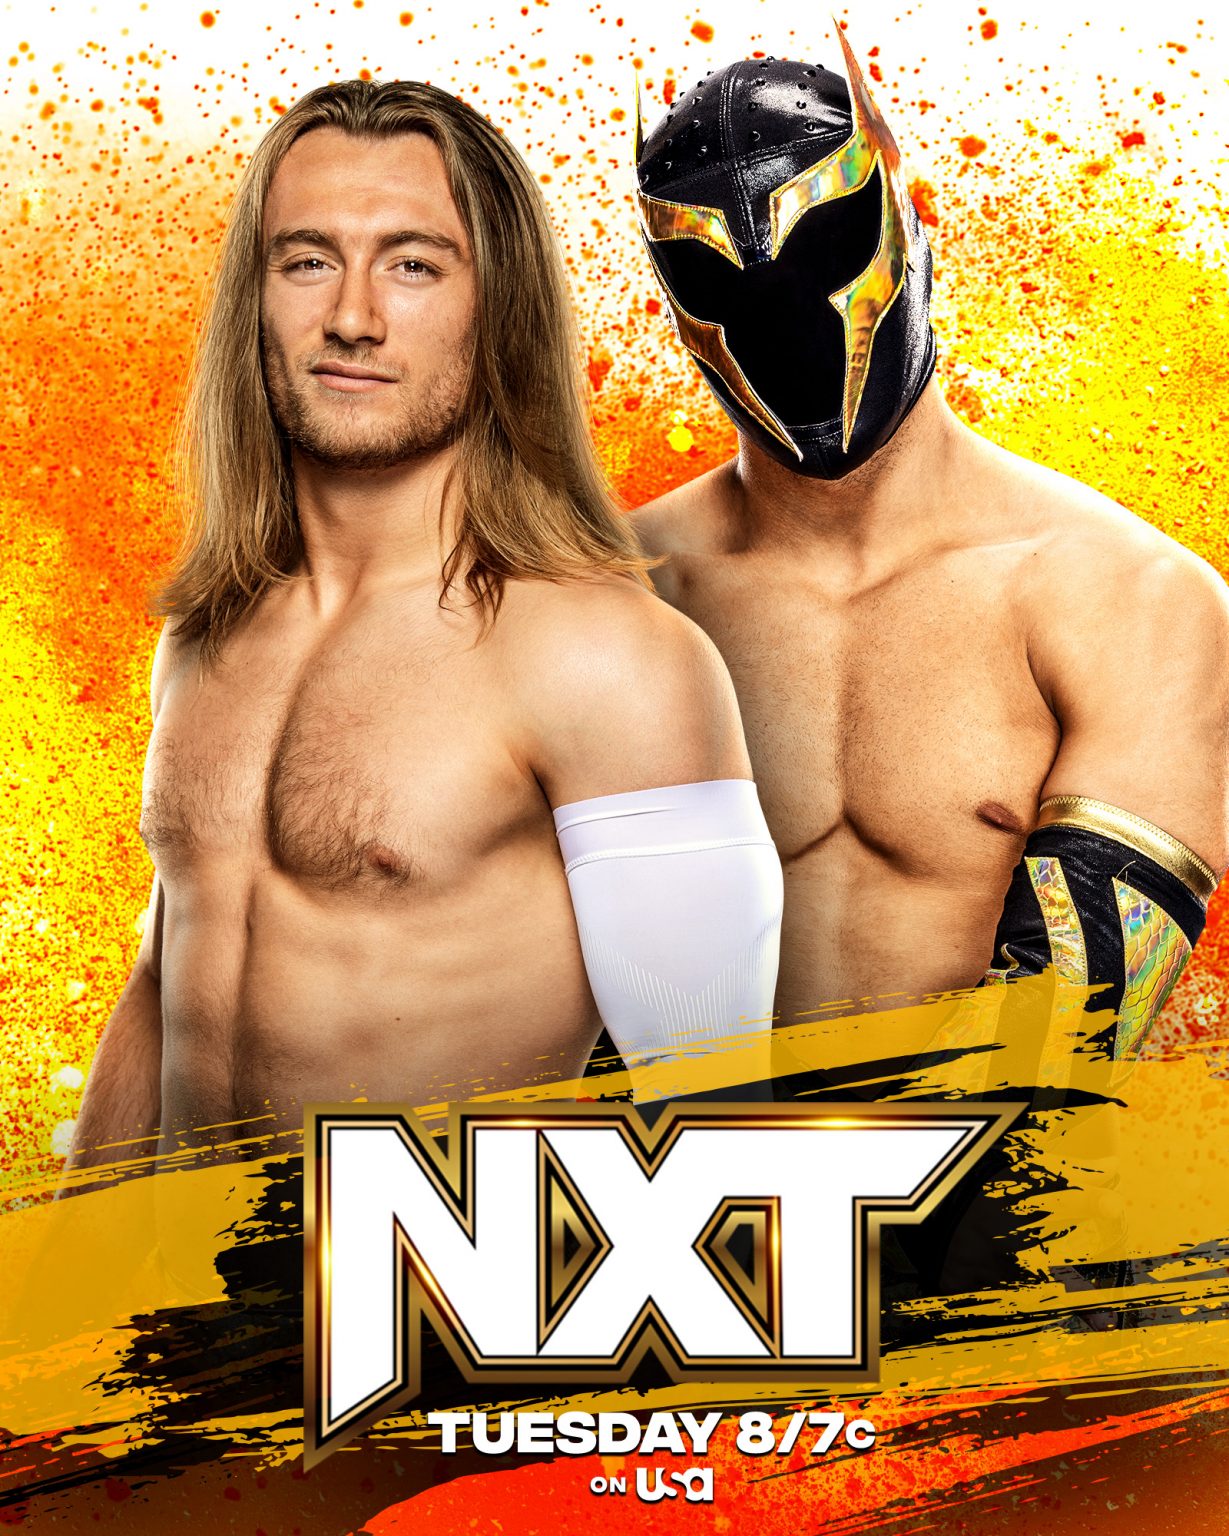 NXT October 11, 2022 Falls Count Anywhere